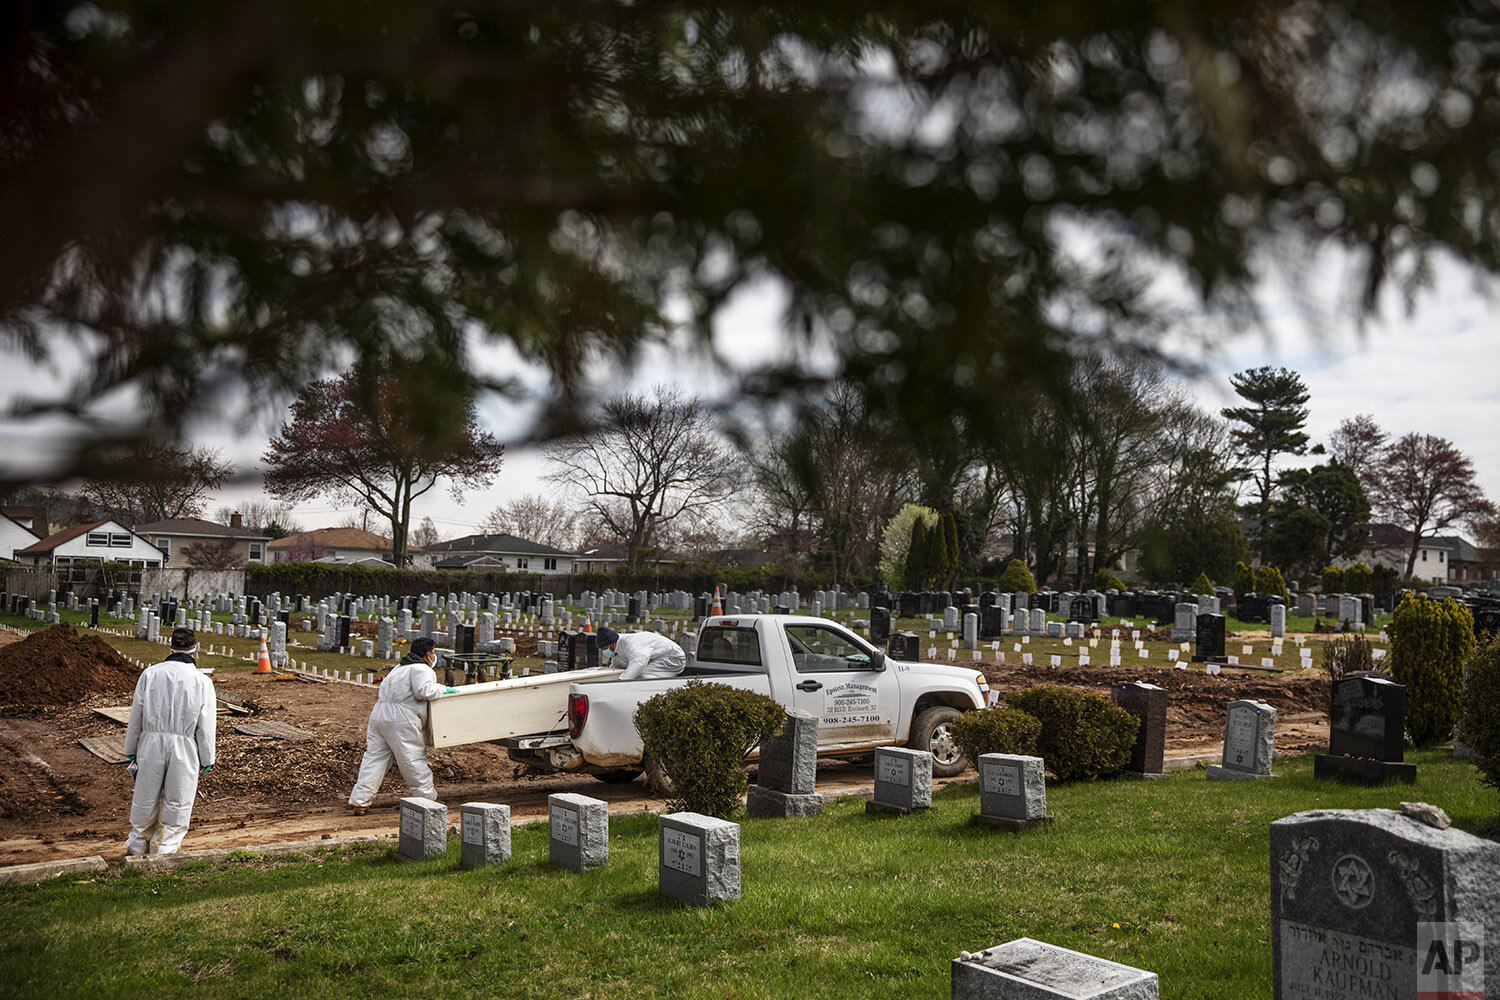  Rabbi Shmuel Plafker, left, watches as a casket is brought for burial at Mount Richmond Cemetery in the Staten Island borough of New York, Wednesday, April 8, 2020. Plafker looks at the trees in bloom and the grass sprouting and finds spring???s sig